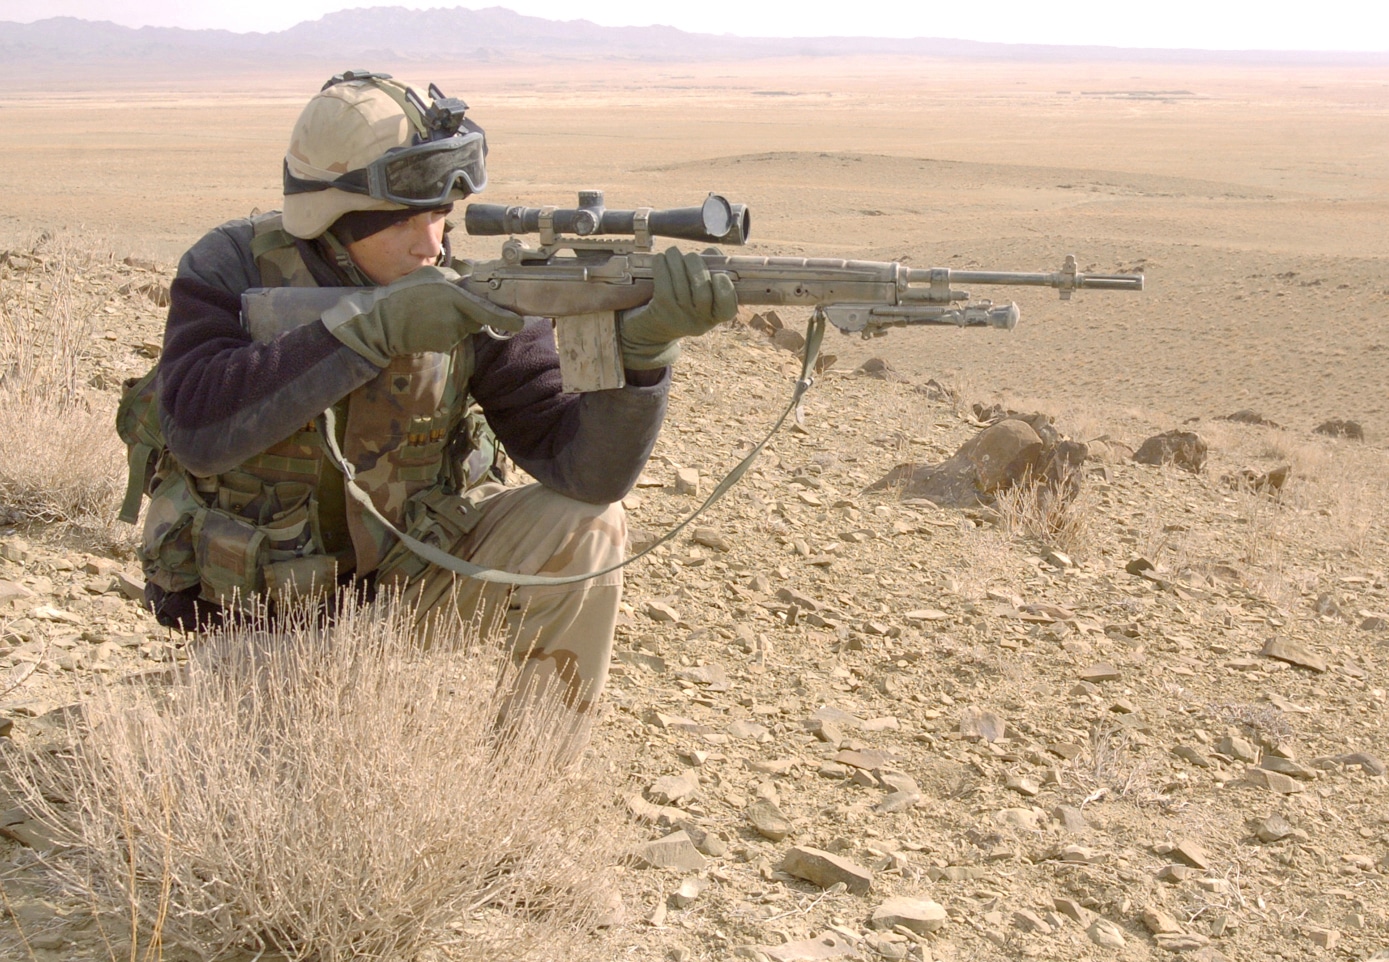 M21A5 in use by soldier in combat in Afghanistan